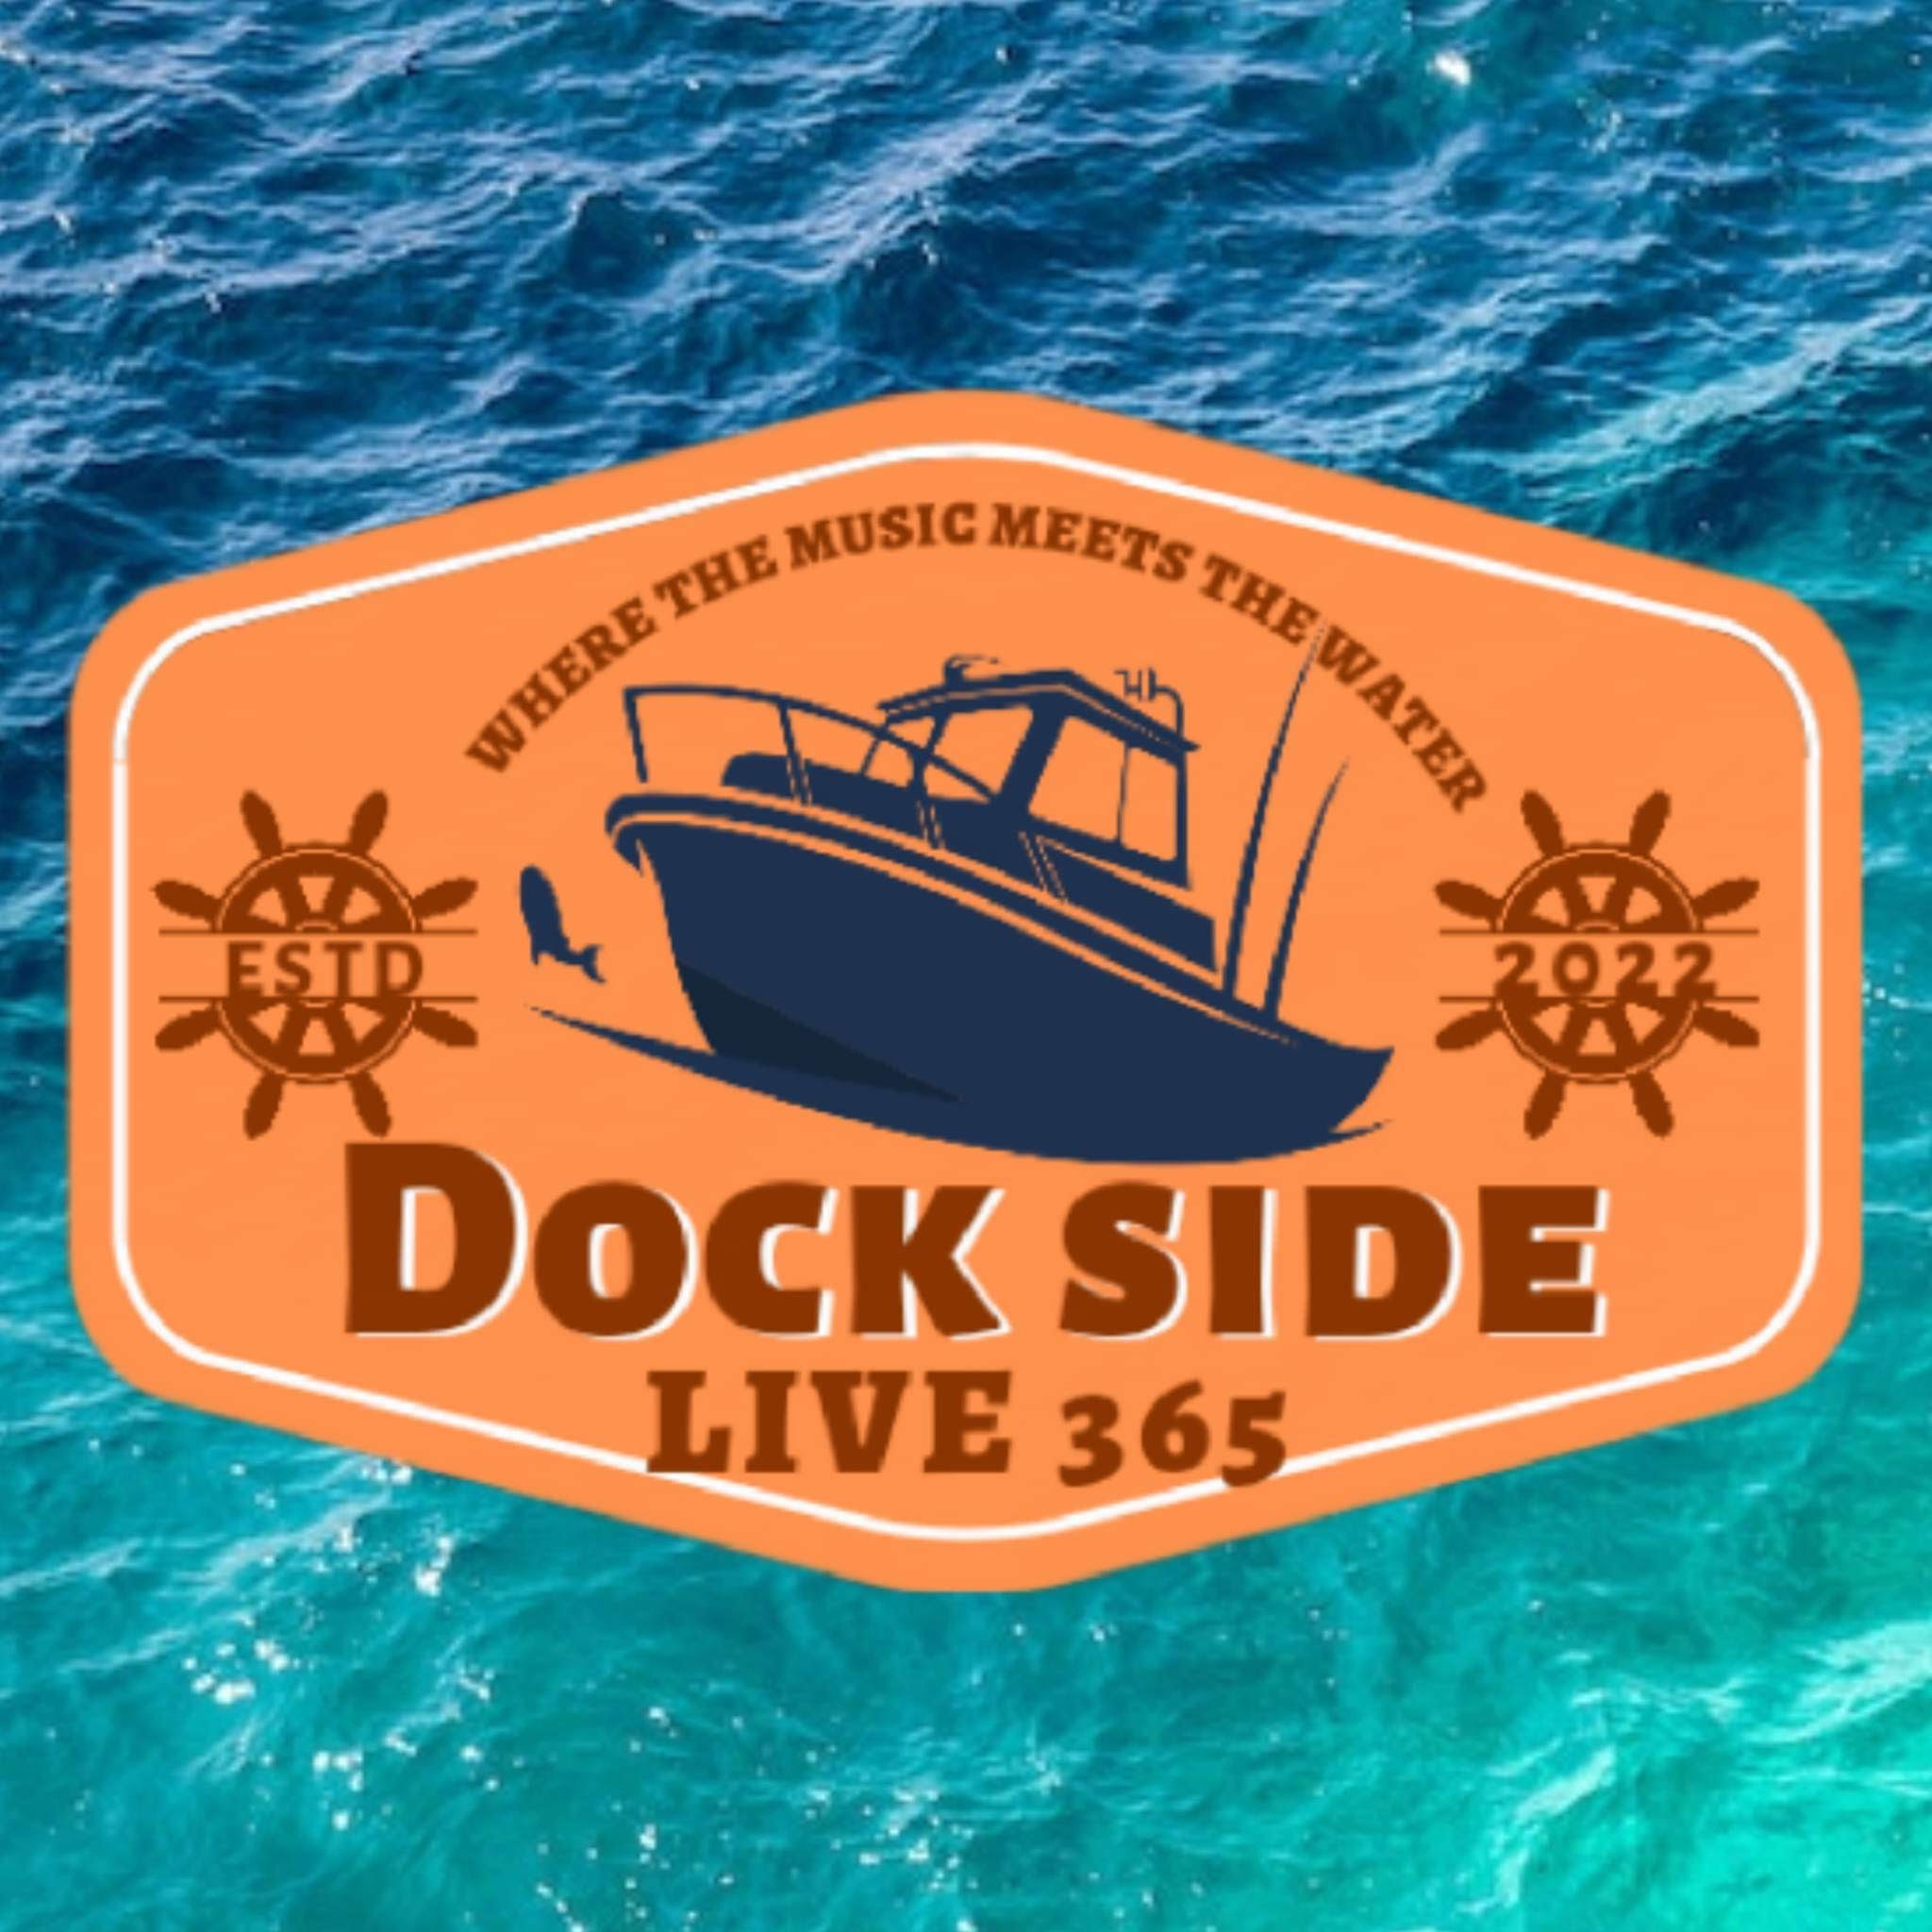 Art for Dock Side Live365 by Ray Boone